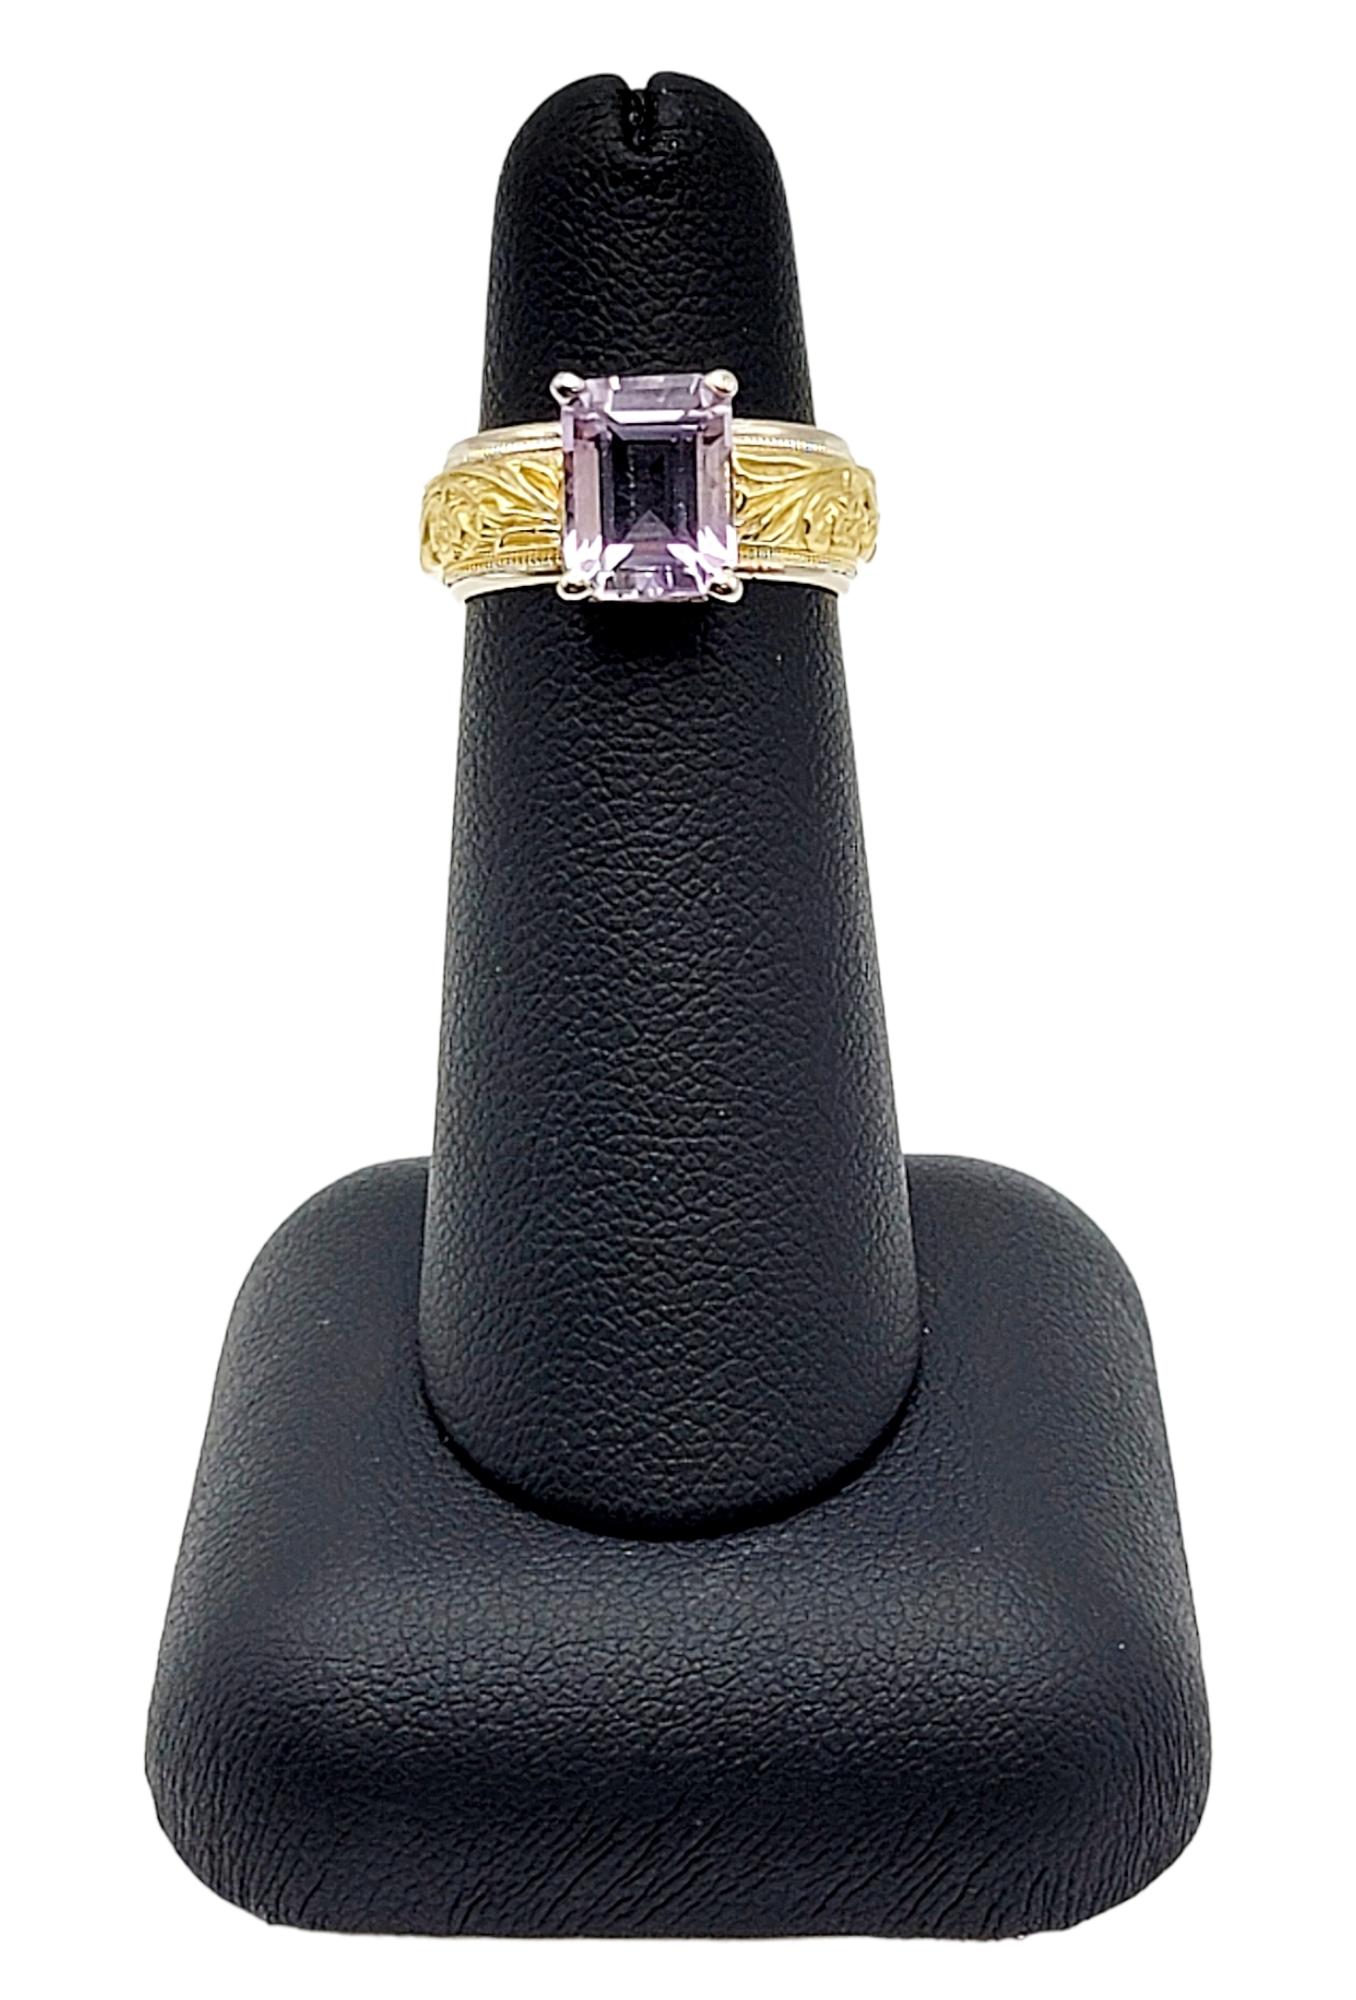 Emerald Cut Amethyst Solitaire Ring with Ornate Engraved Band in 18 Karat Gold For Sale 4